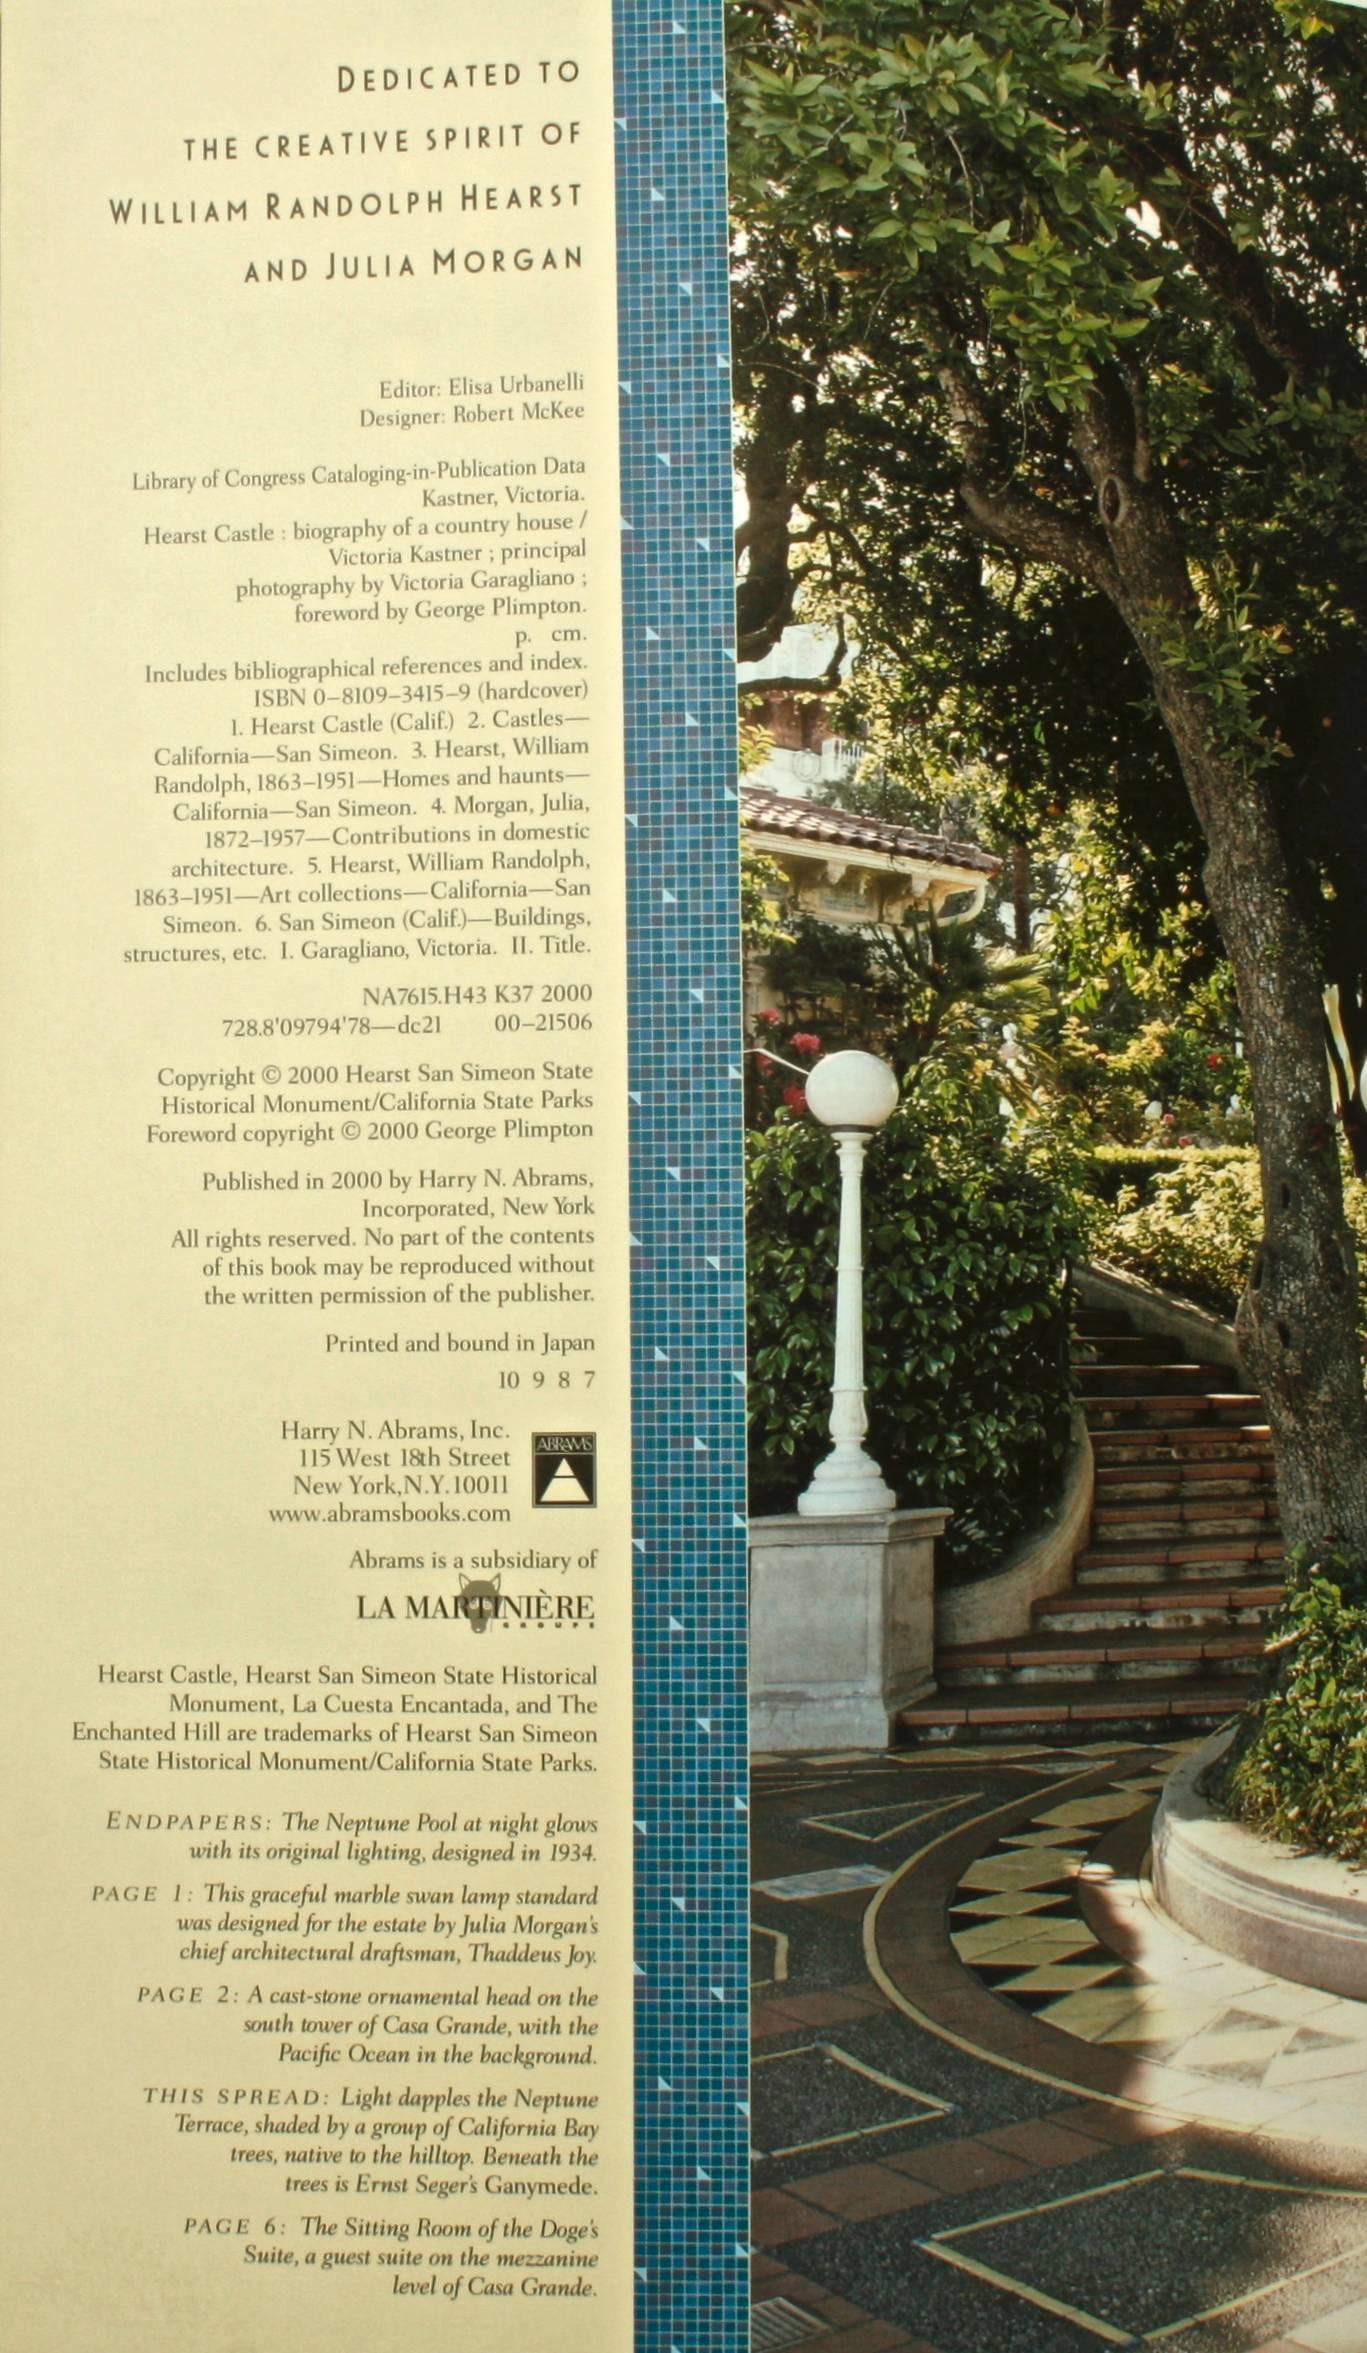 Hearst Castle, a Biography of a Country House by Victoria Kastner 3